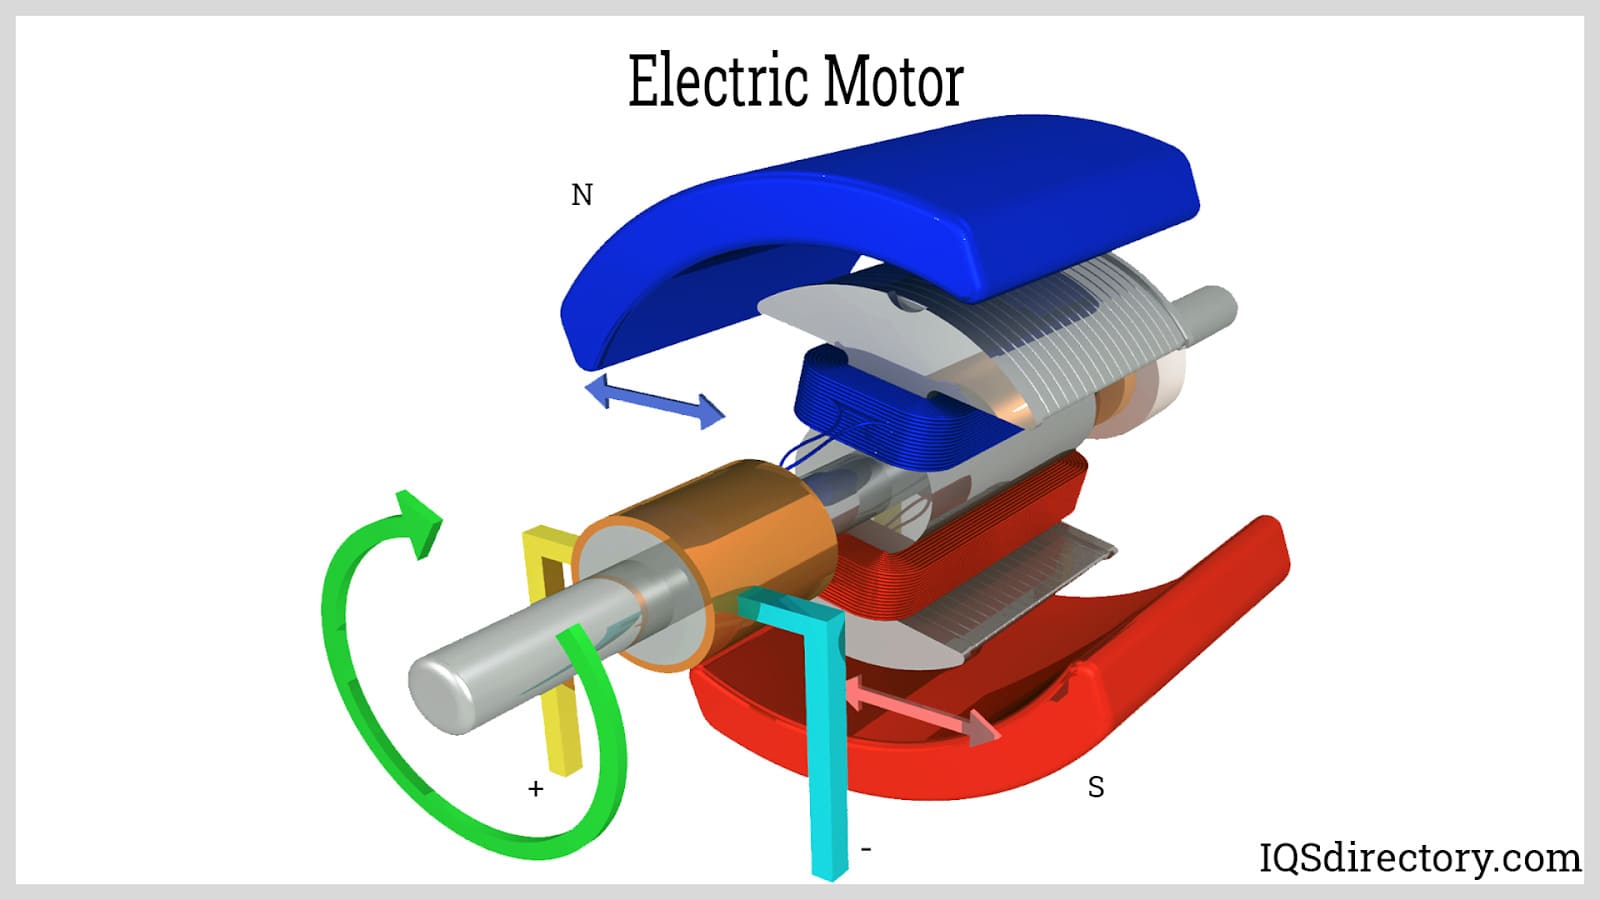 Motors: Types, Applications, Construction, and Benefits